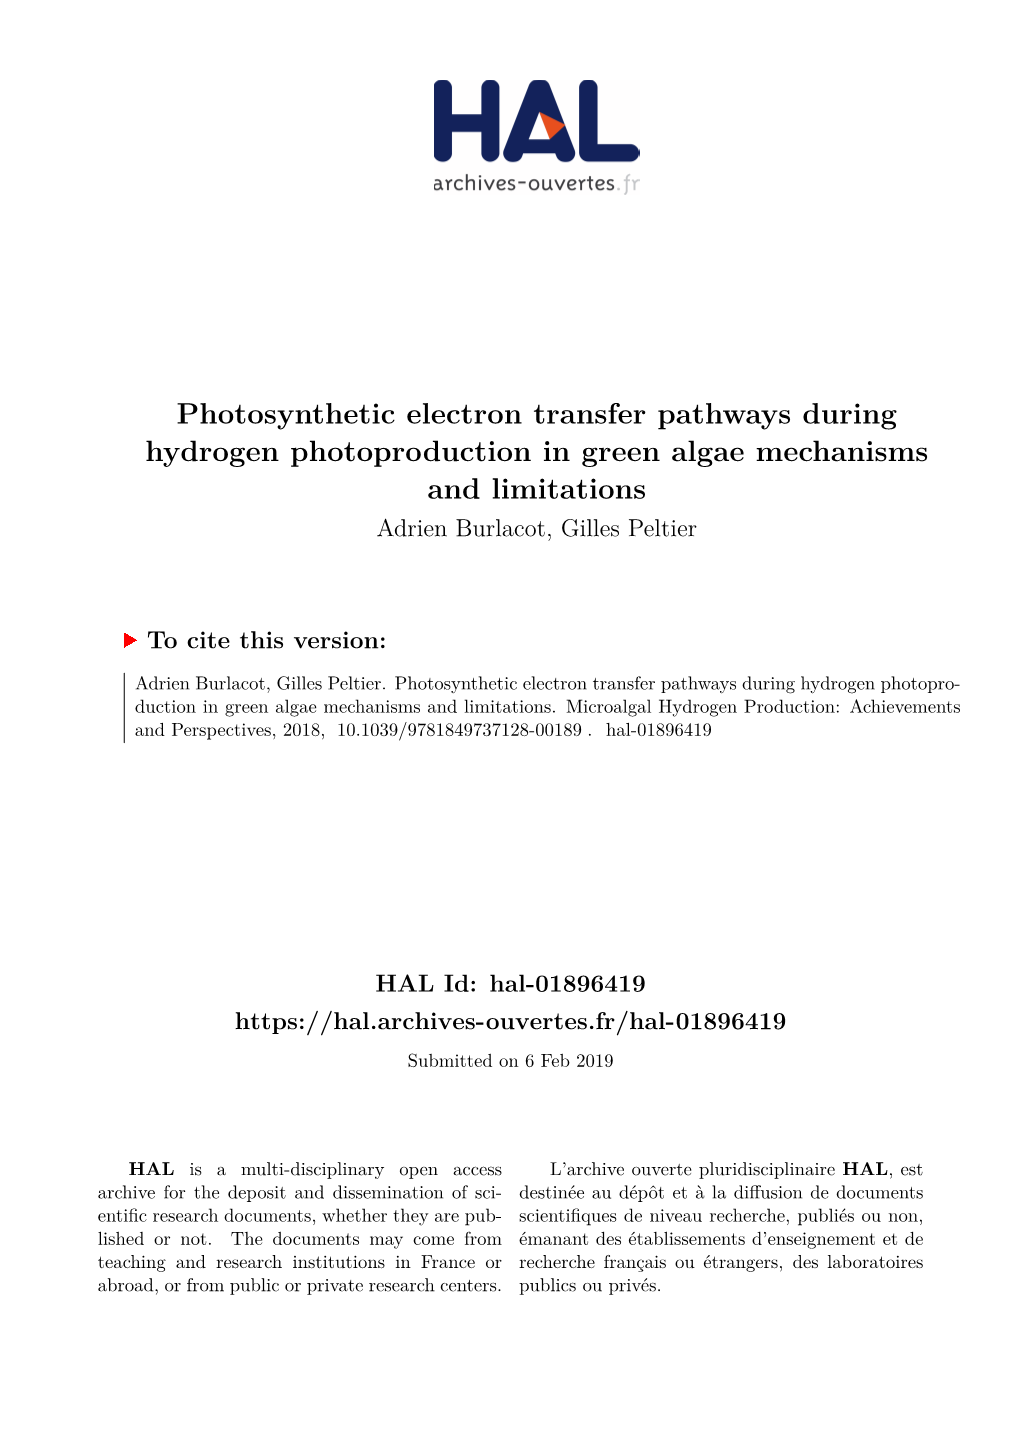 Photosynthetic Electron Transfer Pathways During Hydrogen Photoproduction in Green Algae Mechanisms and Limitations Adrien Burlacot, Gilles Peltier